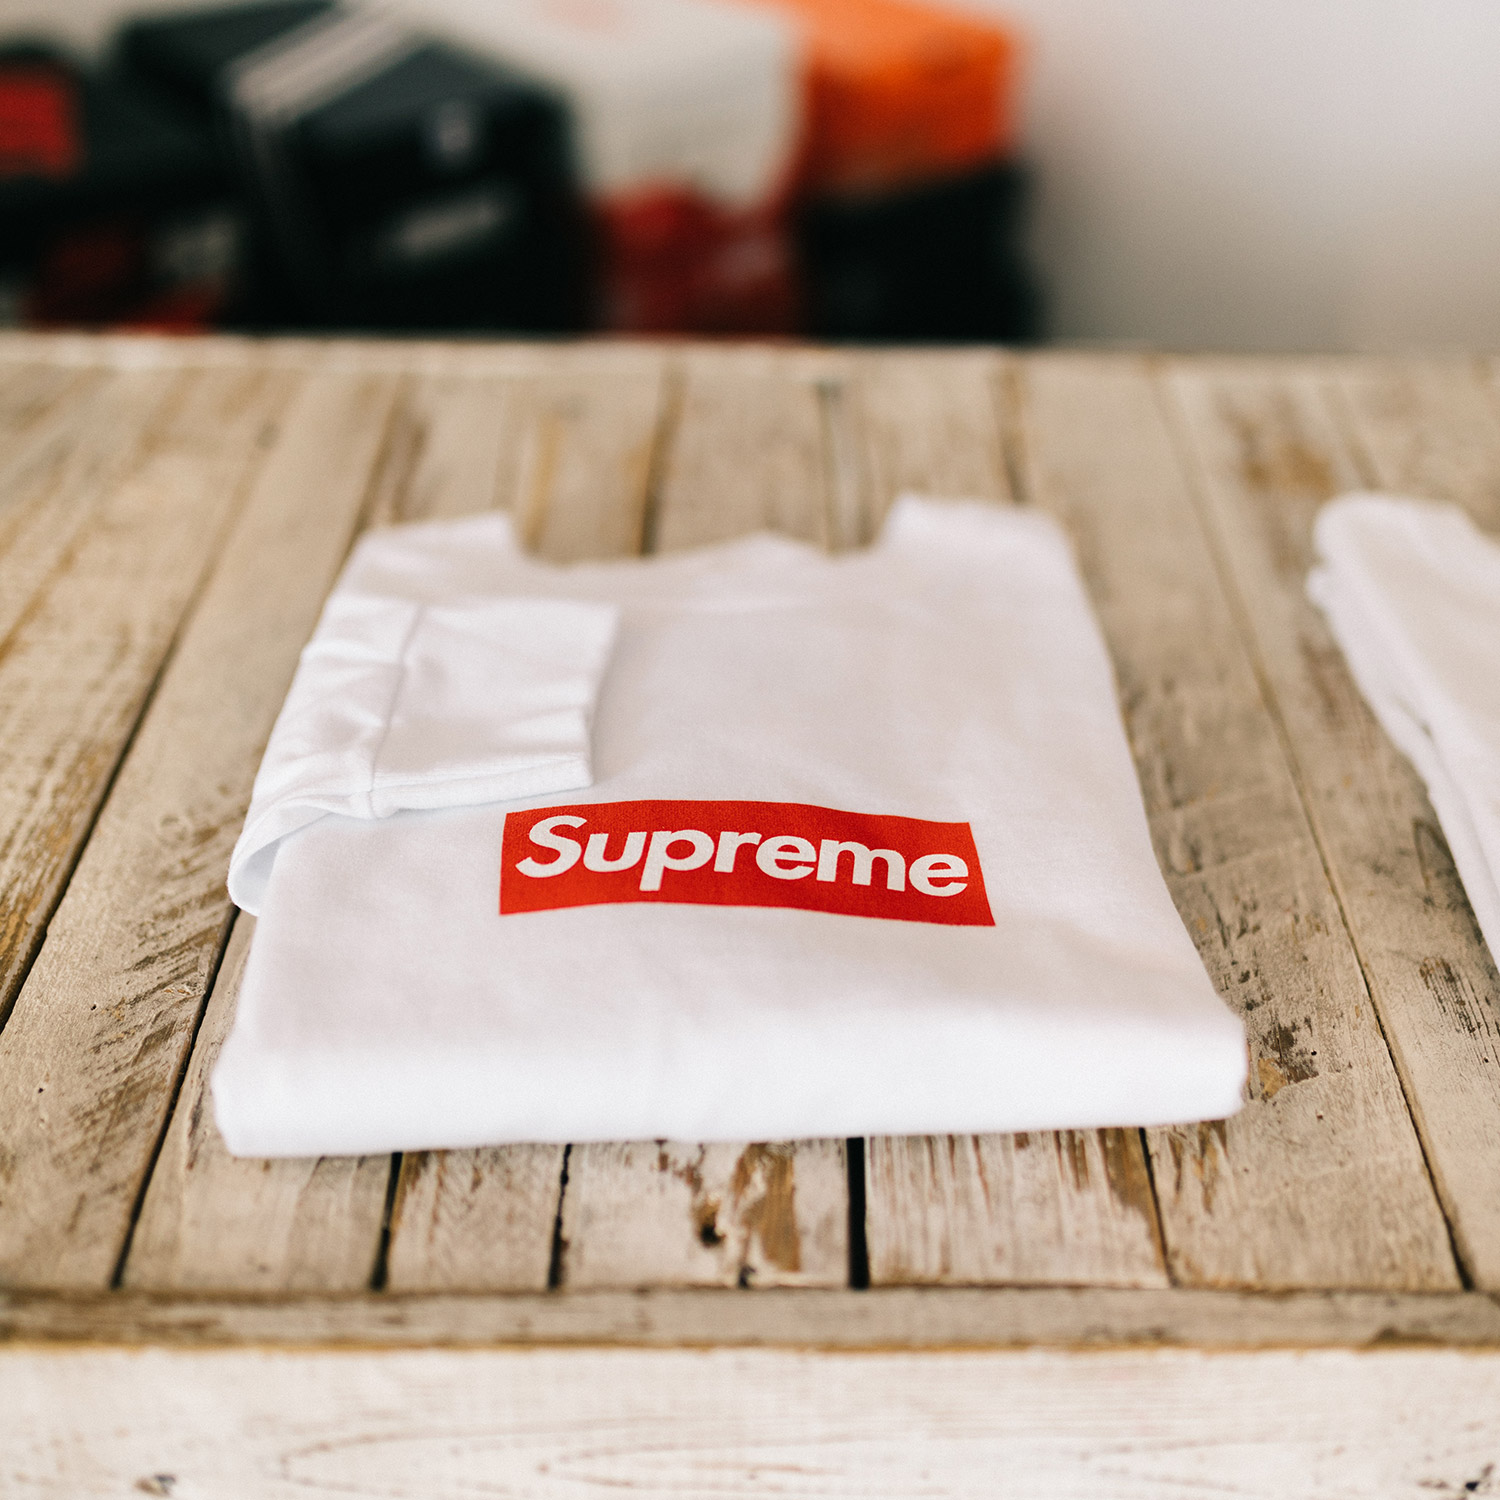 Meet SizeRun, New England’s Supreme Reseller You Need to Know